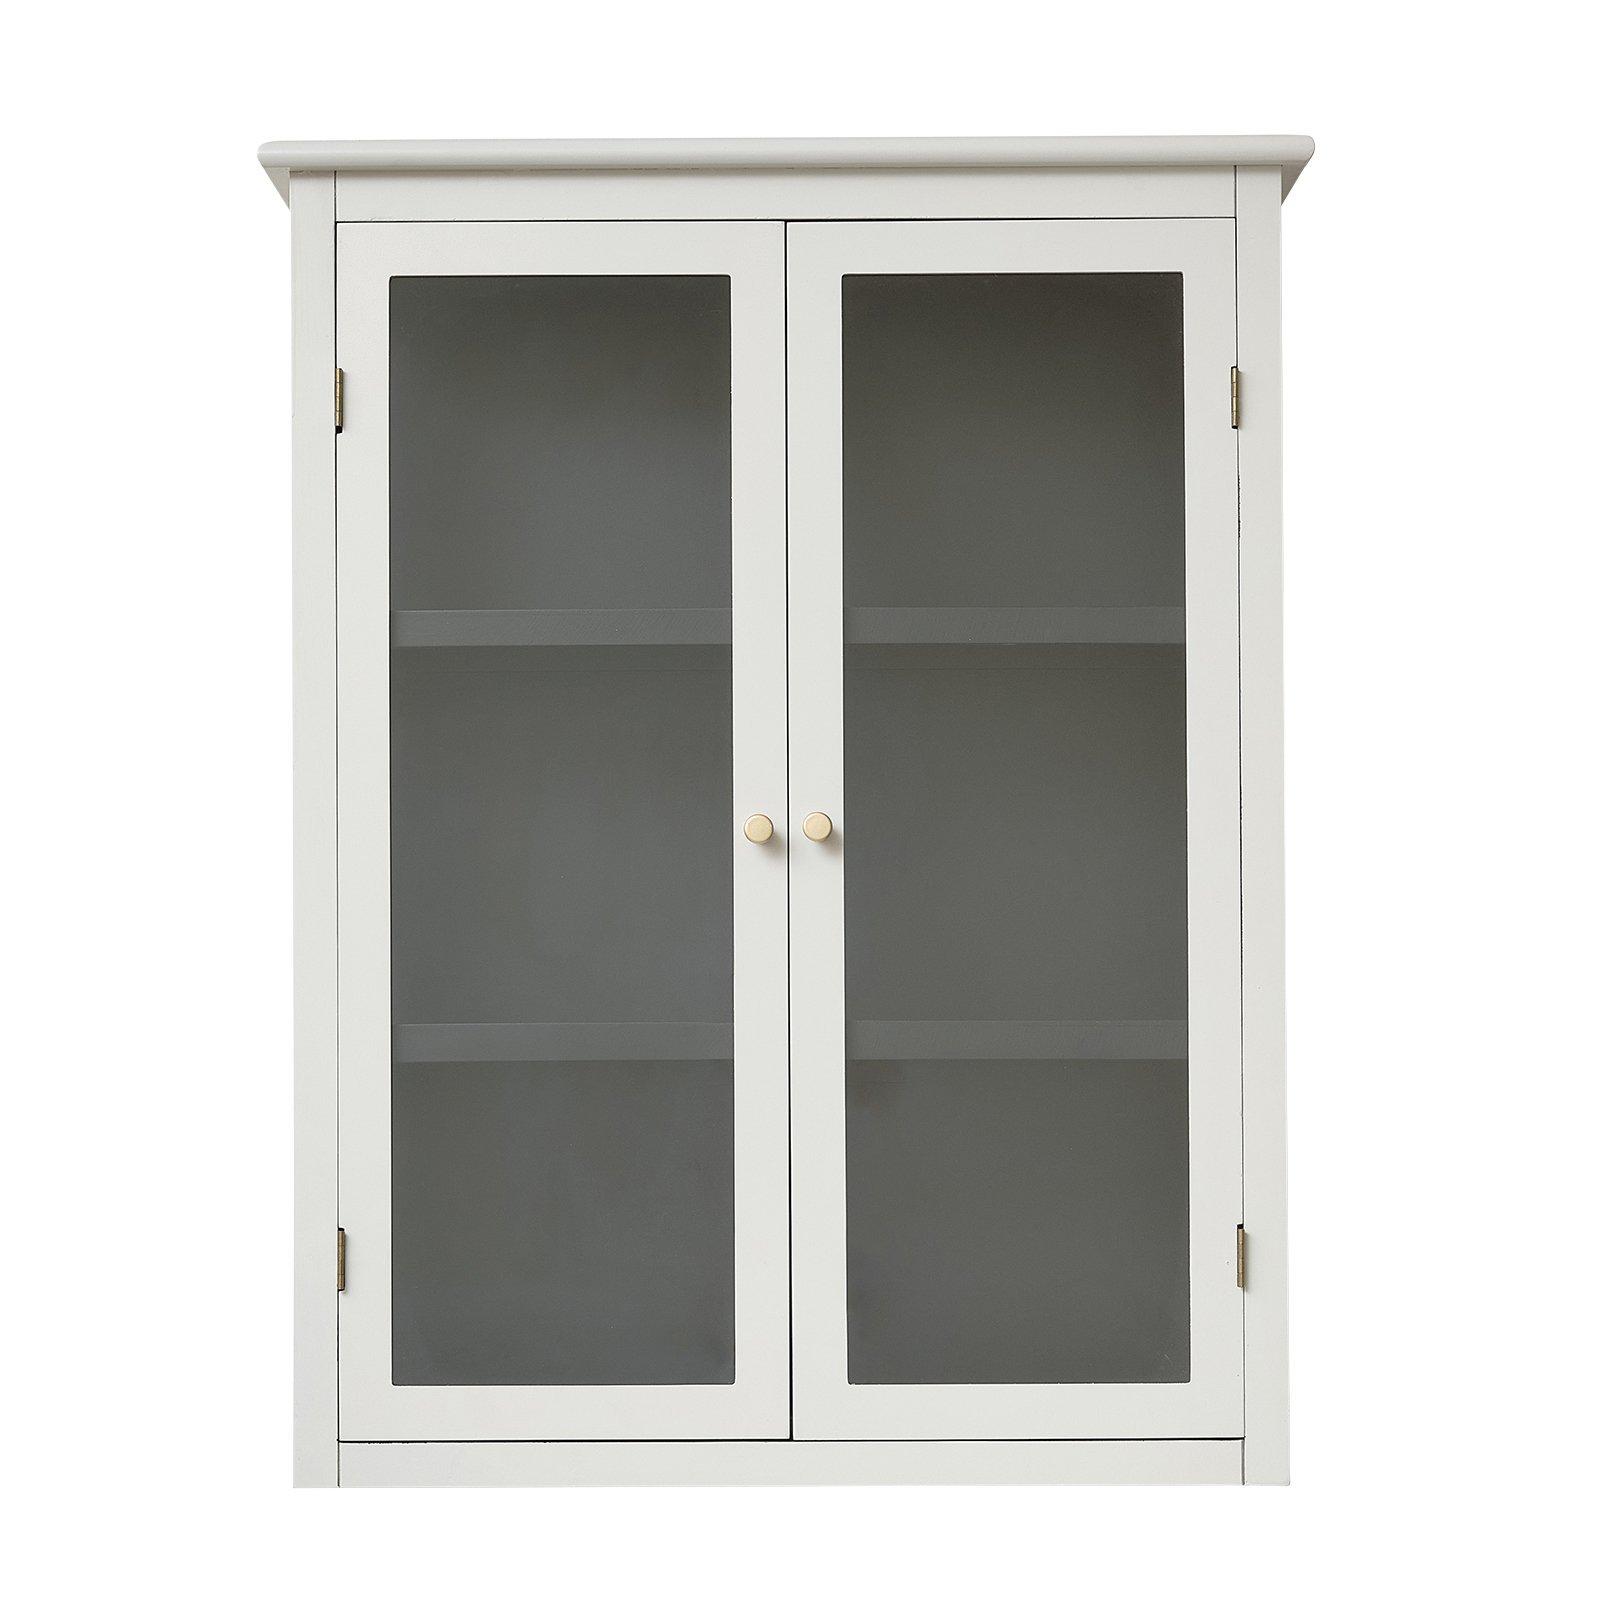 Large Grey & Black Glass Fronted Wall Cabinet 90cm X 70cm